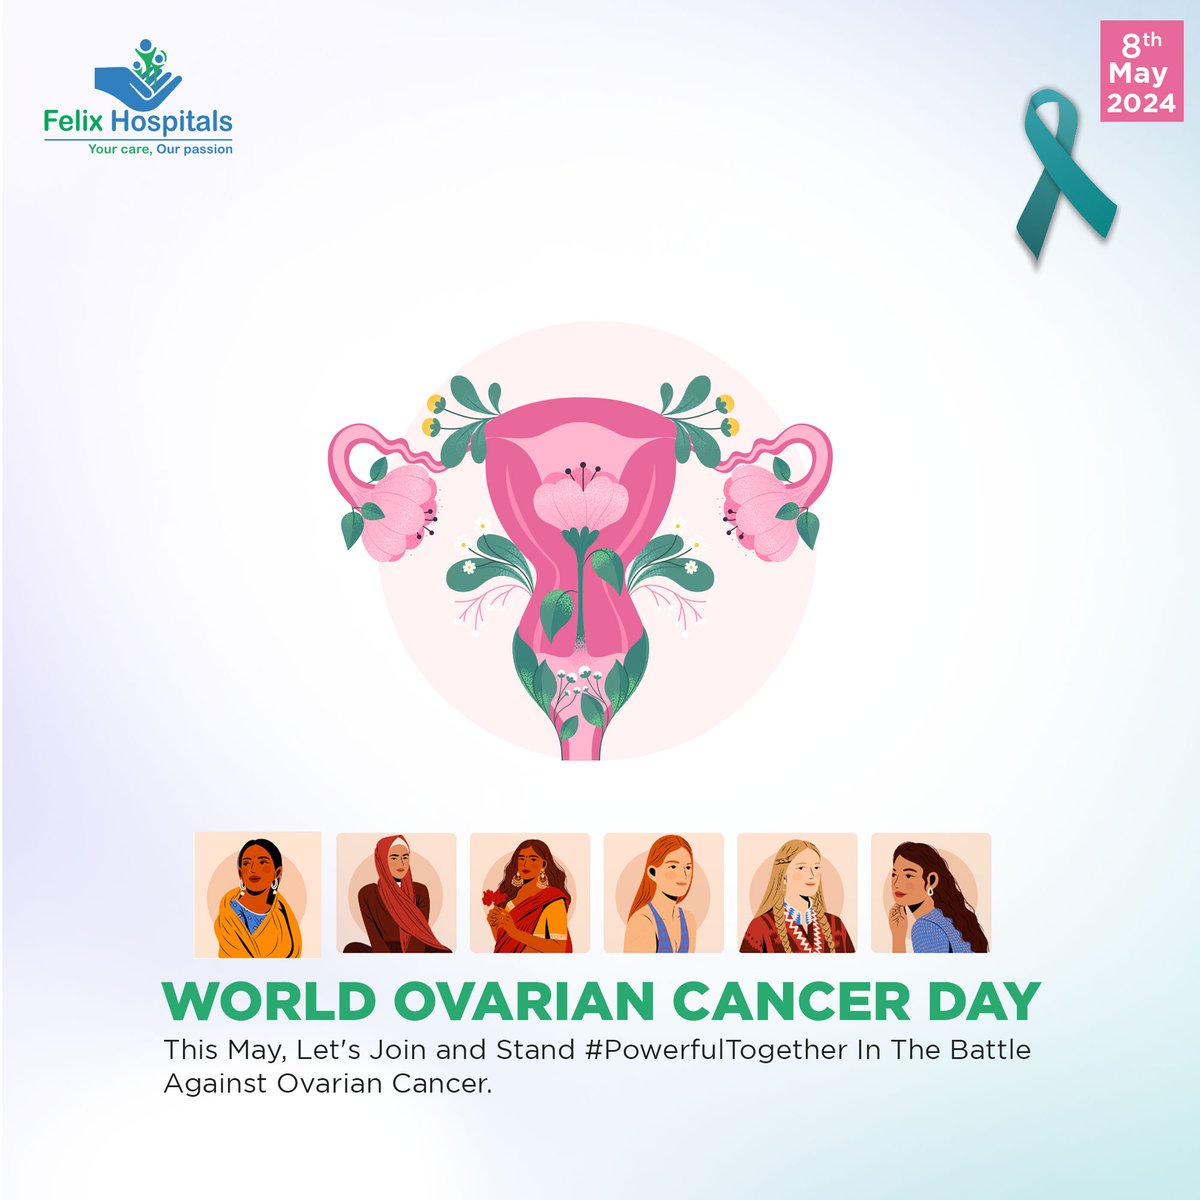 WORLD OVARIAN CANCER DAY

This May, Let's Join and Stand #PowerfulTogether In The Battle Against Ovarian Cancer.

#Cancer #ovariancancer #BeatCancer #letsgo #besthospitalinnoida #hospitalnearme #HealthCheckup #everyone #hospitalinnoida #exploremore #felixhospital